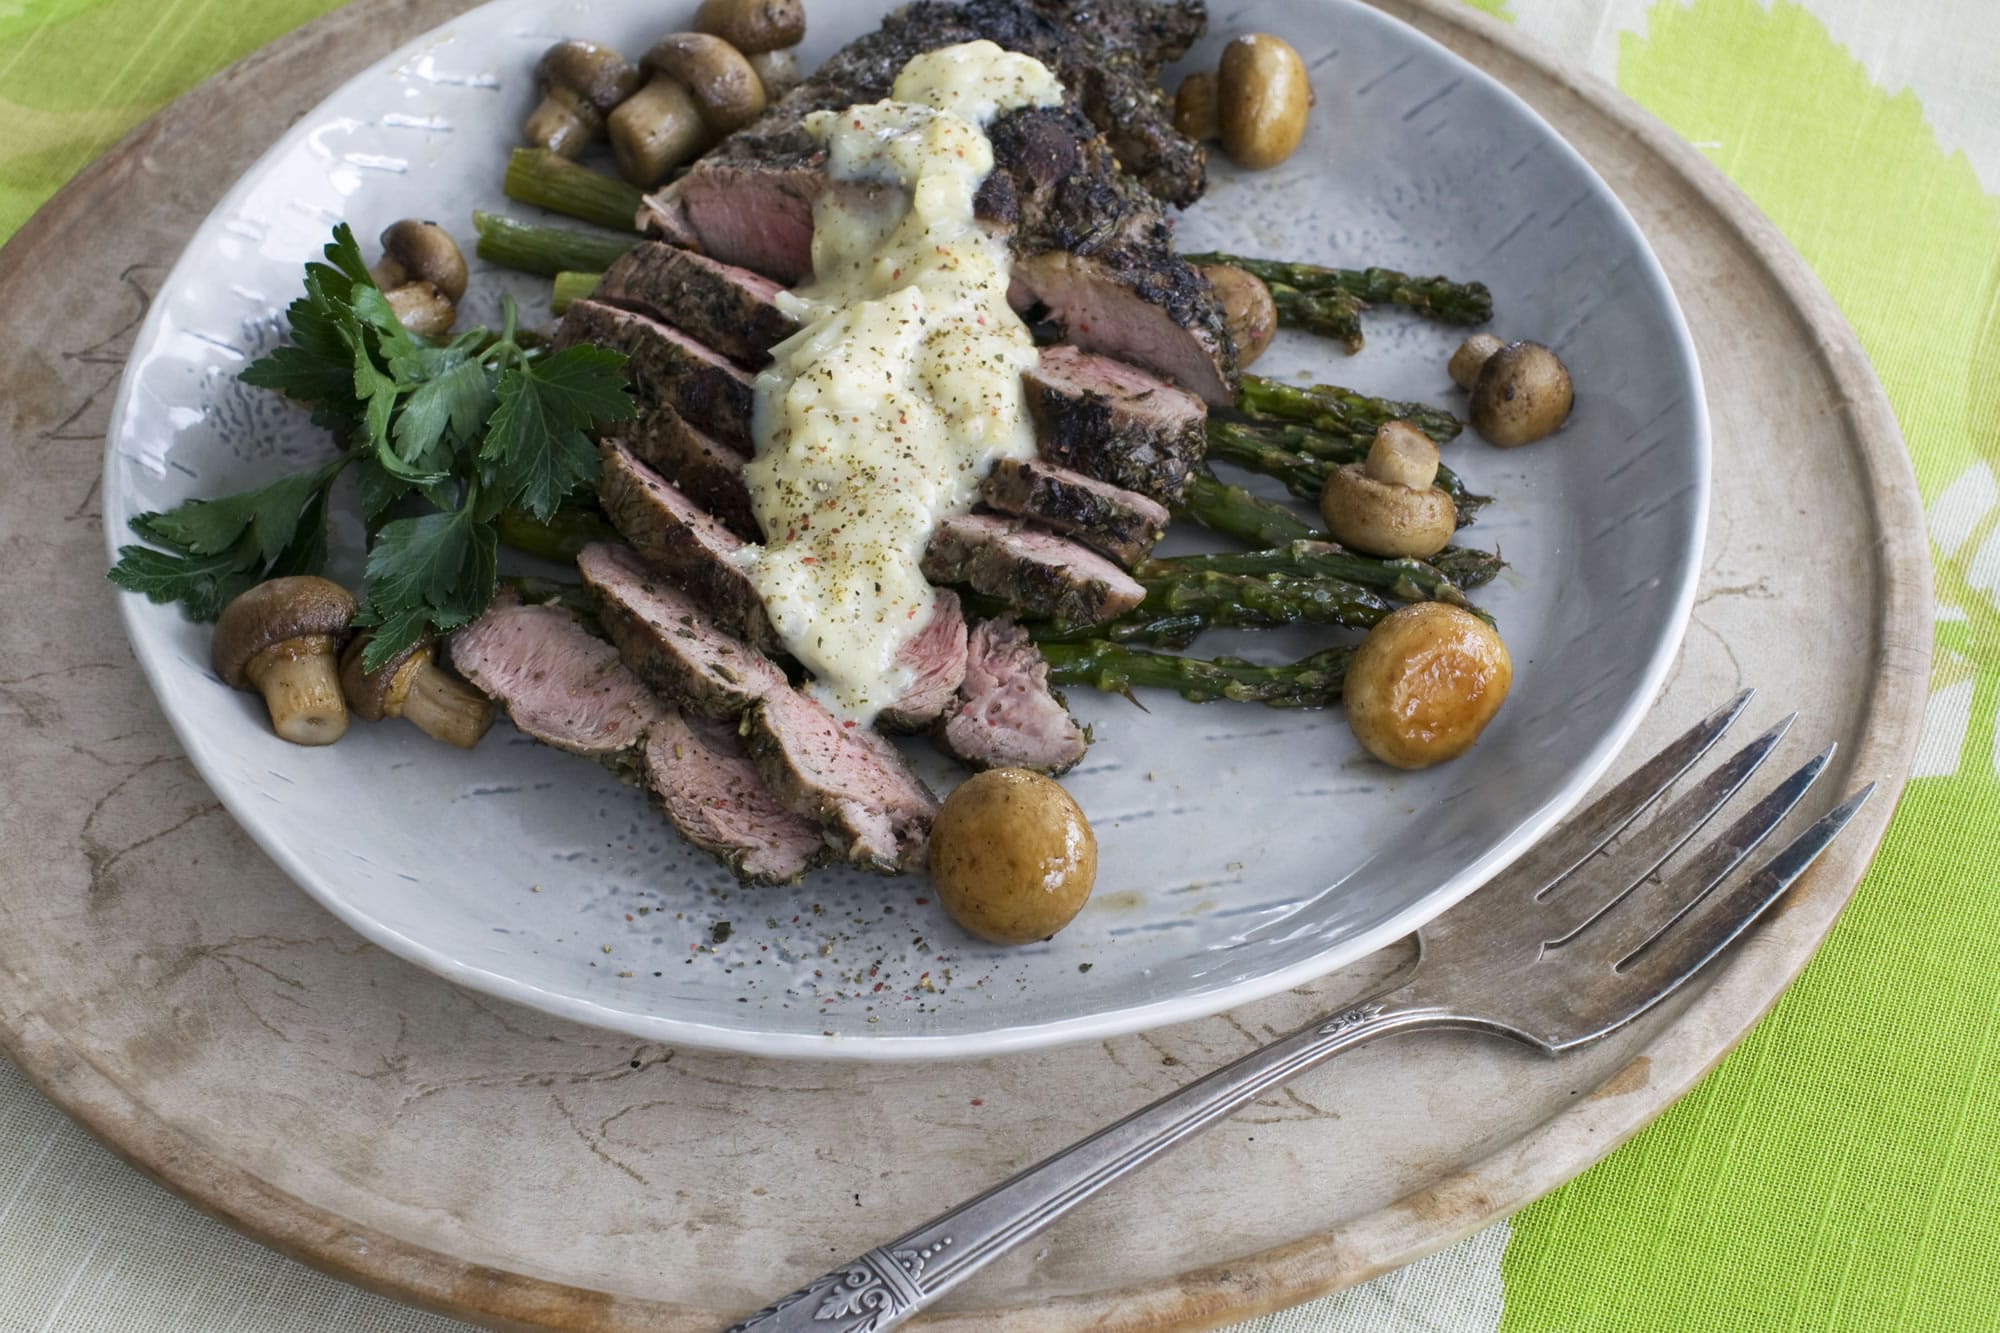 Smaller lamb steaks cut from the leg get the Mediterranean treatment in this Grilled Lamb Steaks With Artichoke Lemon Sauce recipe.